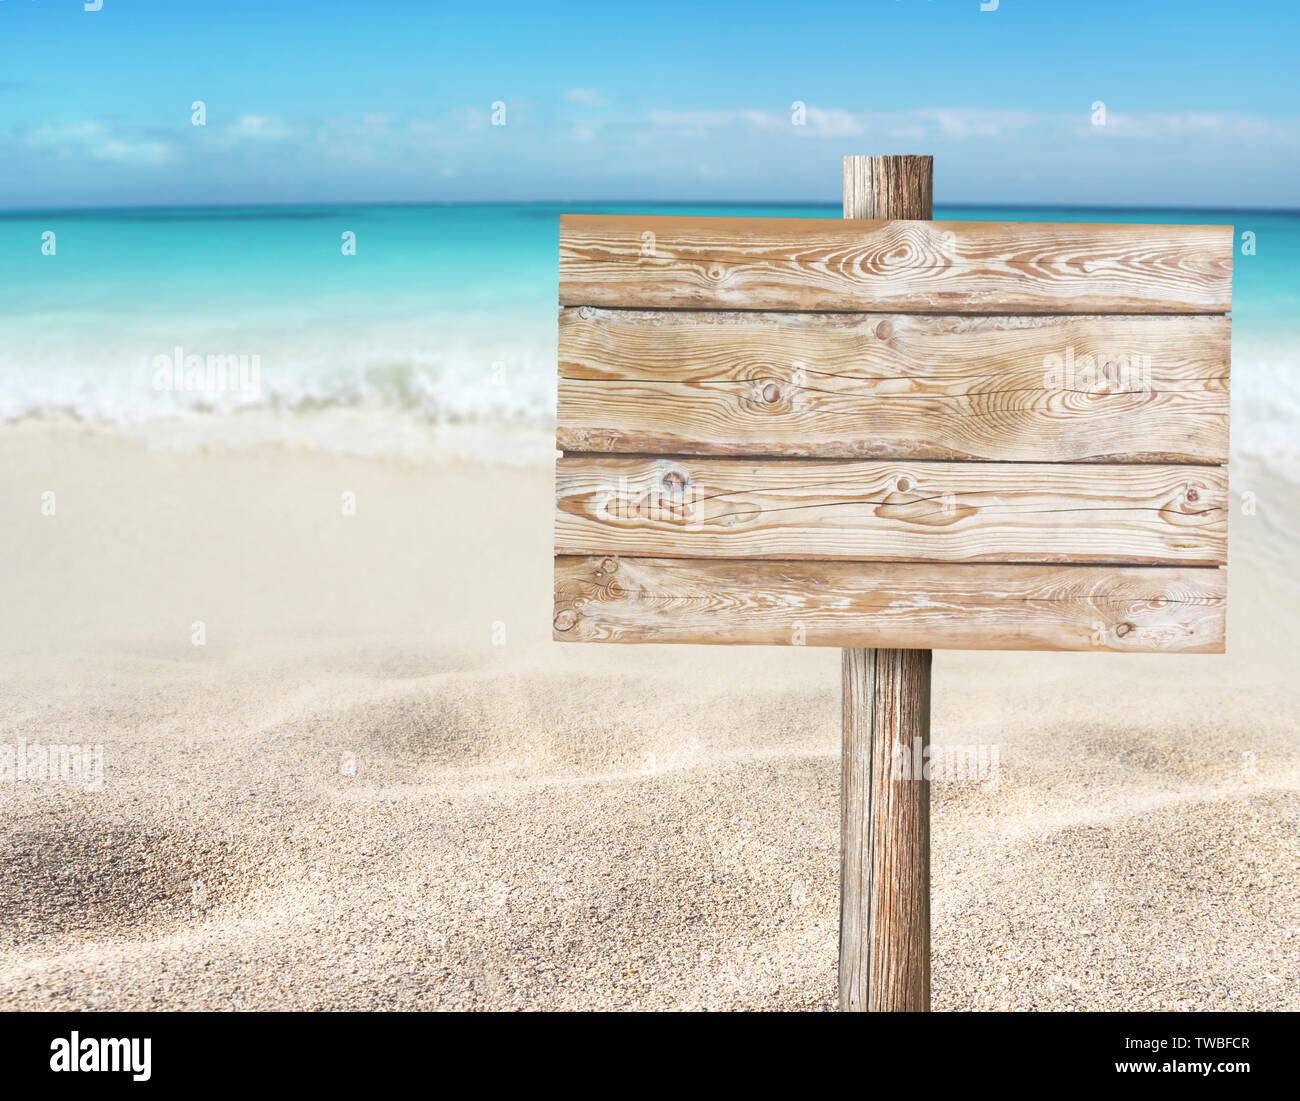 Wooden planks sign board on the beach blurred background.  Tropical island paradise. Sandy shore washing by the wave. Bright turquoise ocean water. Stock Photo